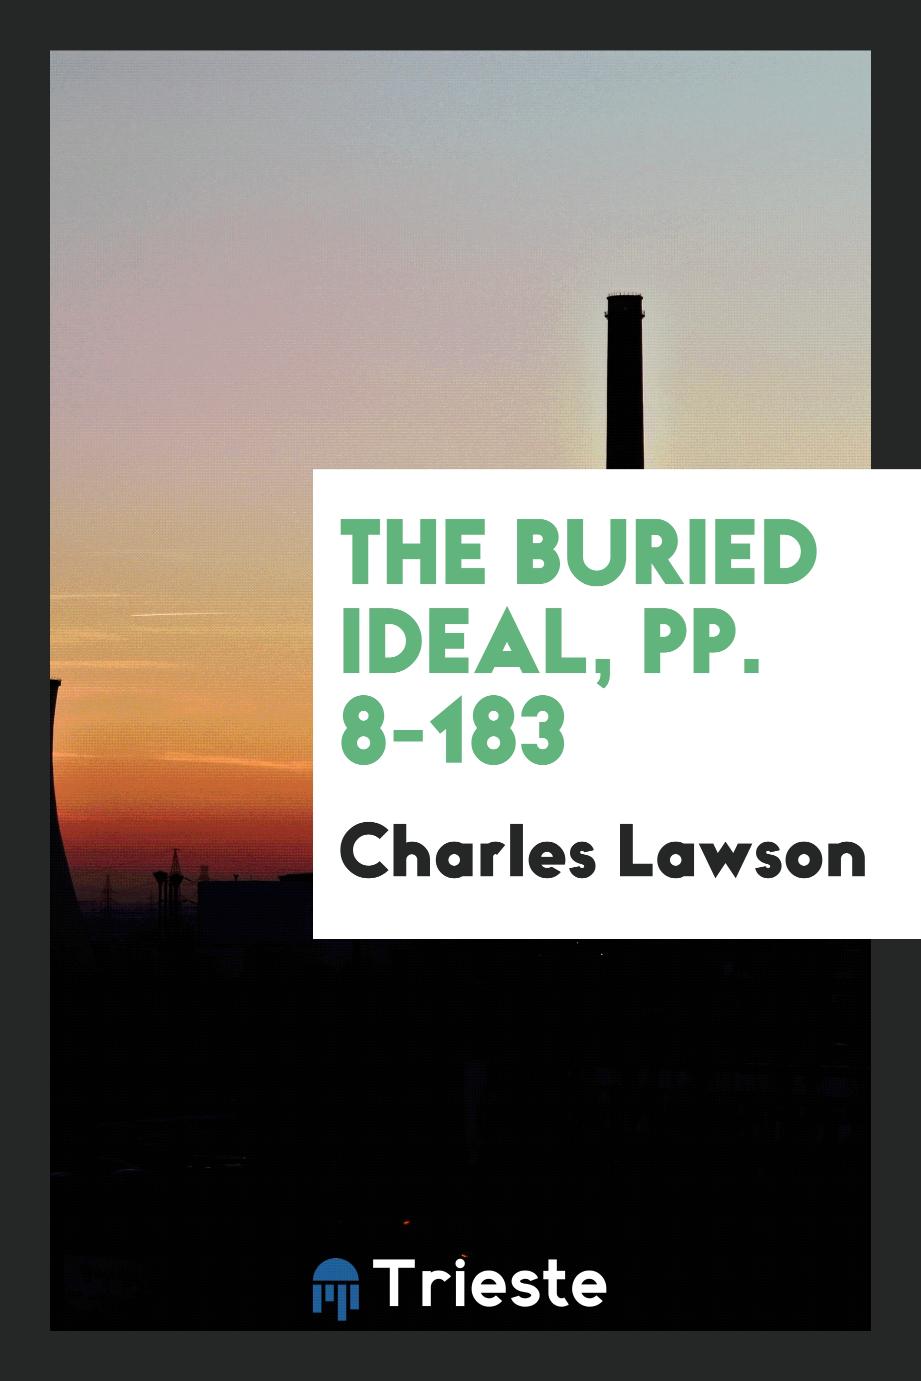 The Buried Ideal, pp. 8-183